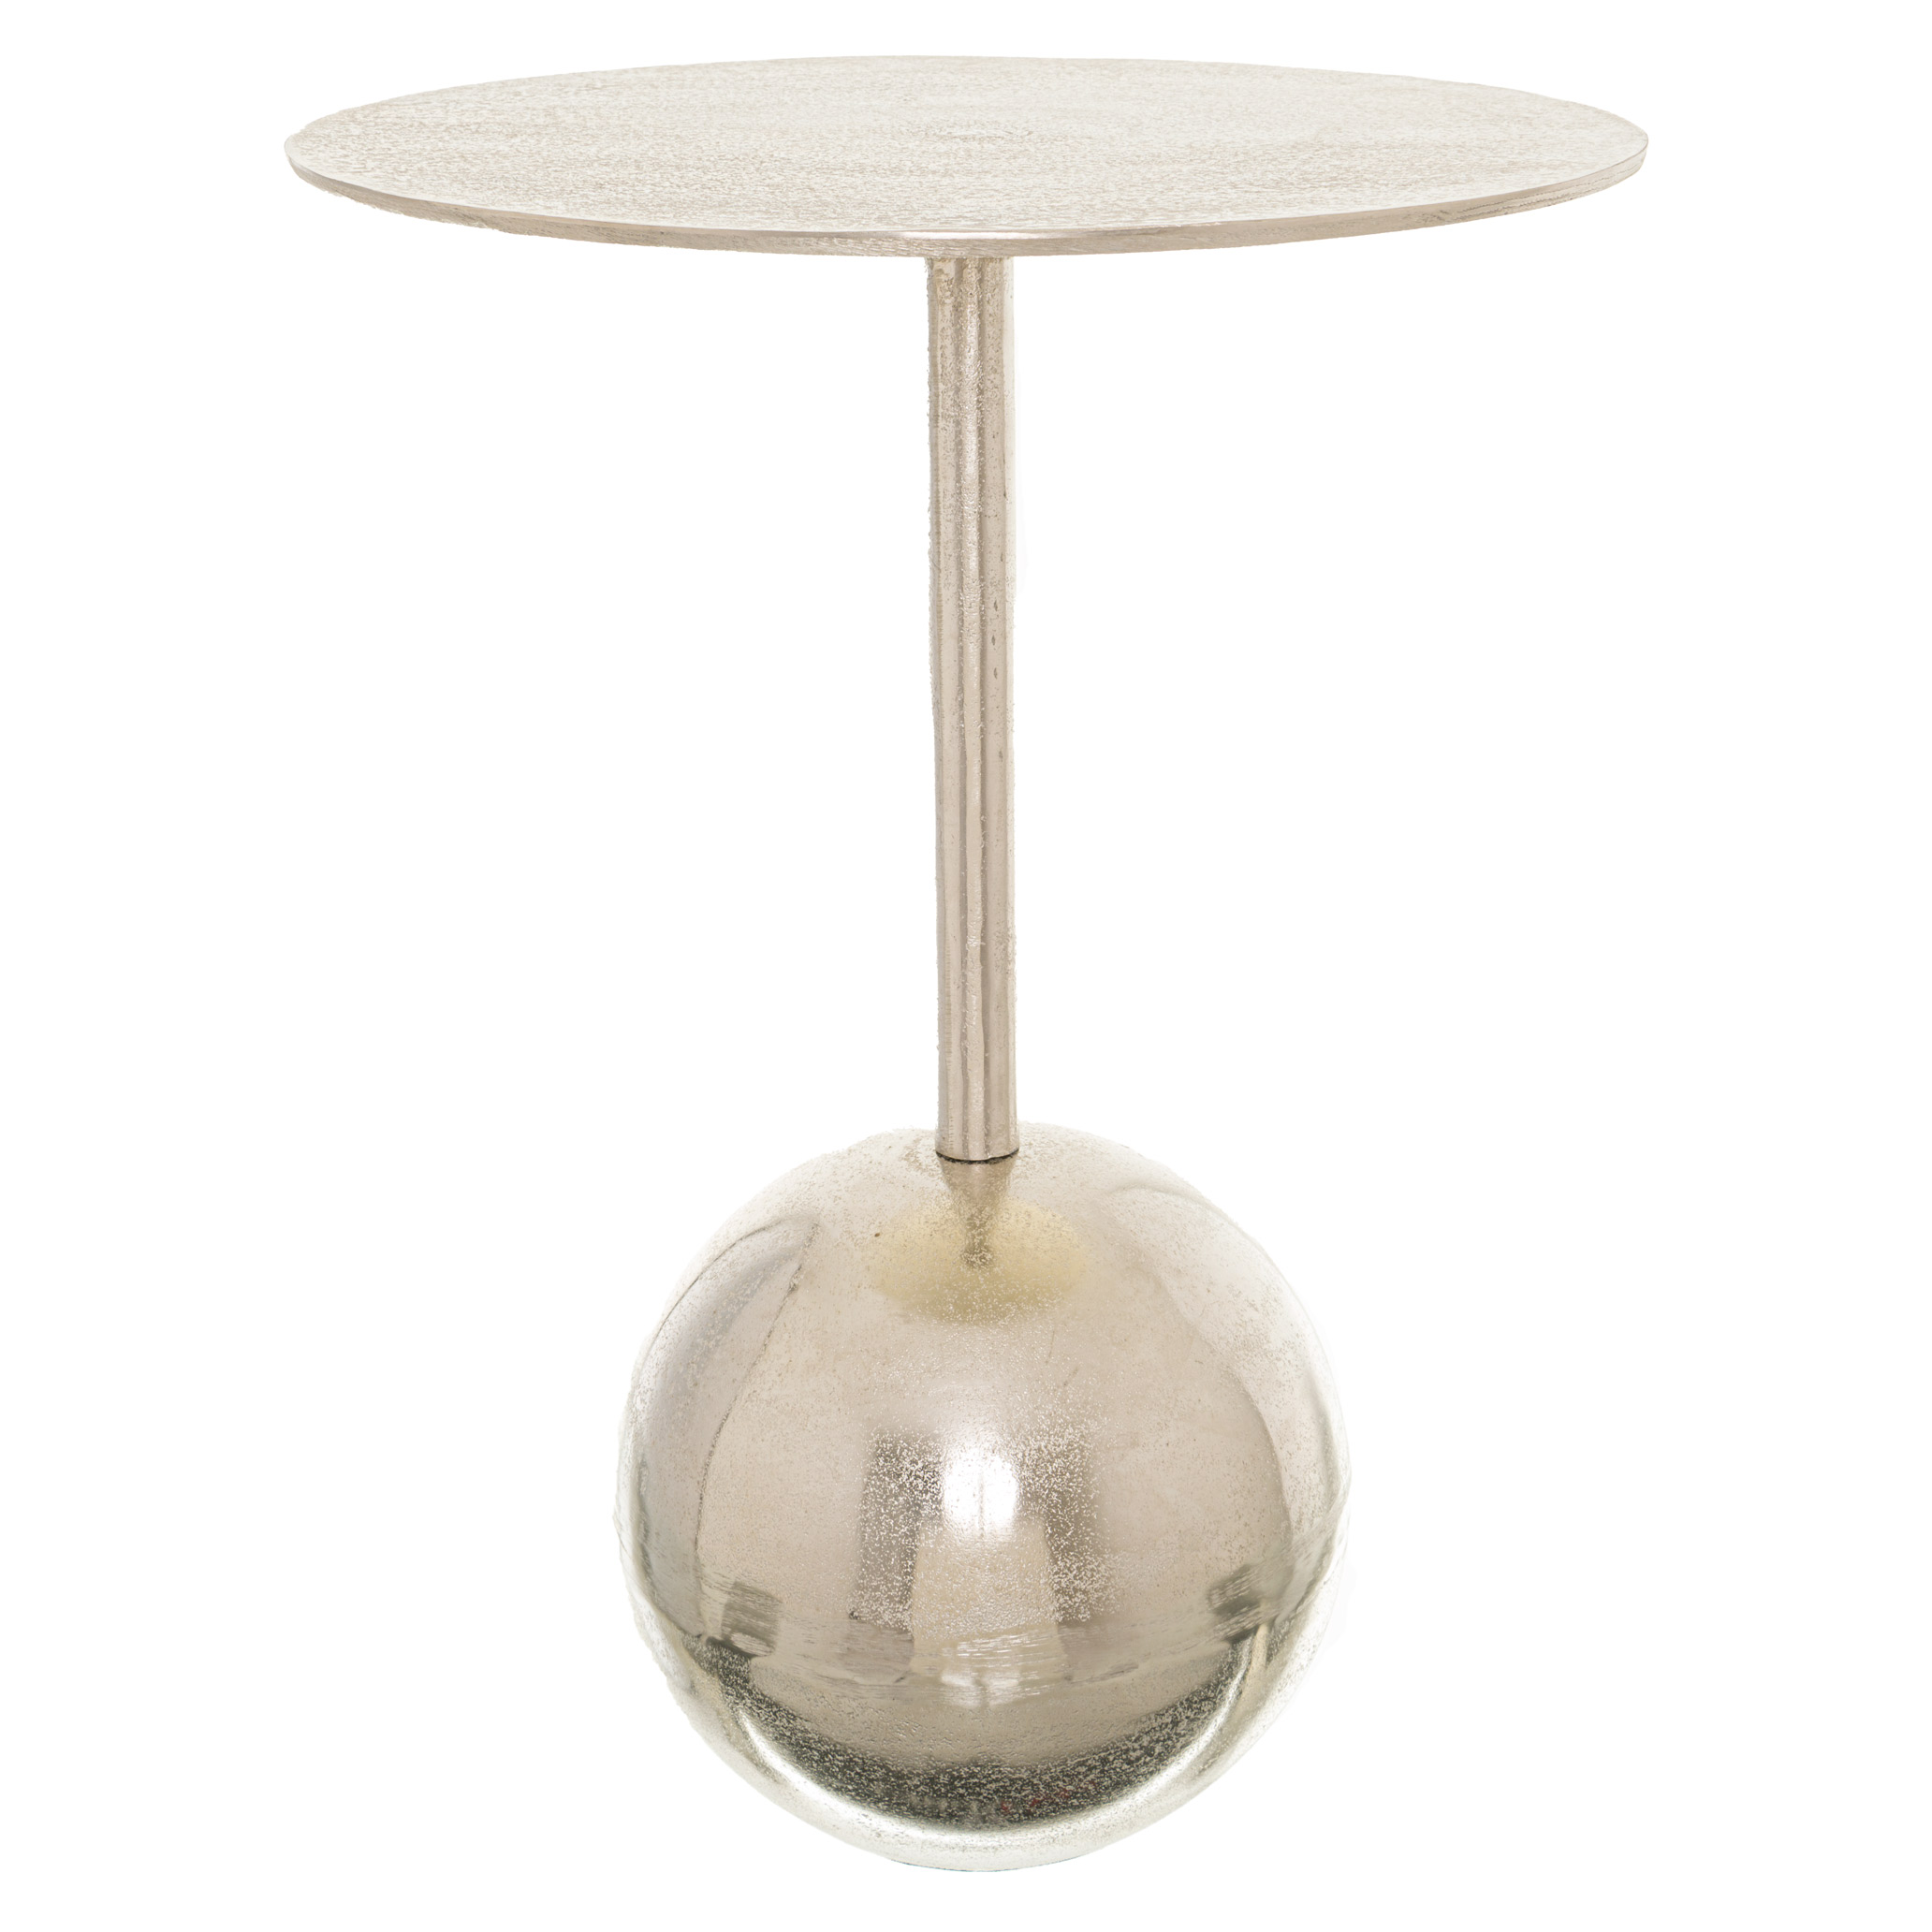 Farrah Collection Ball Footed Side Table - Image 1